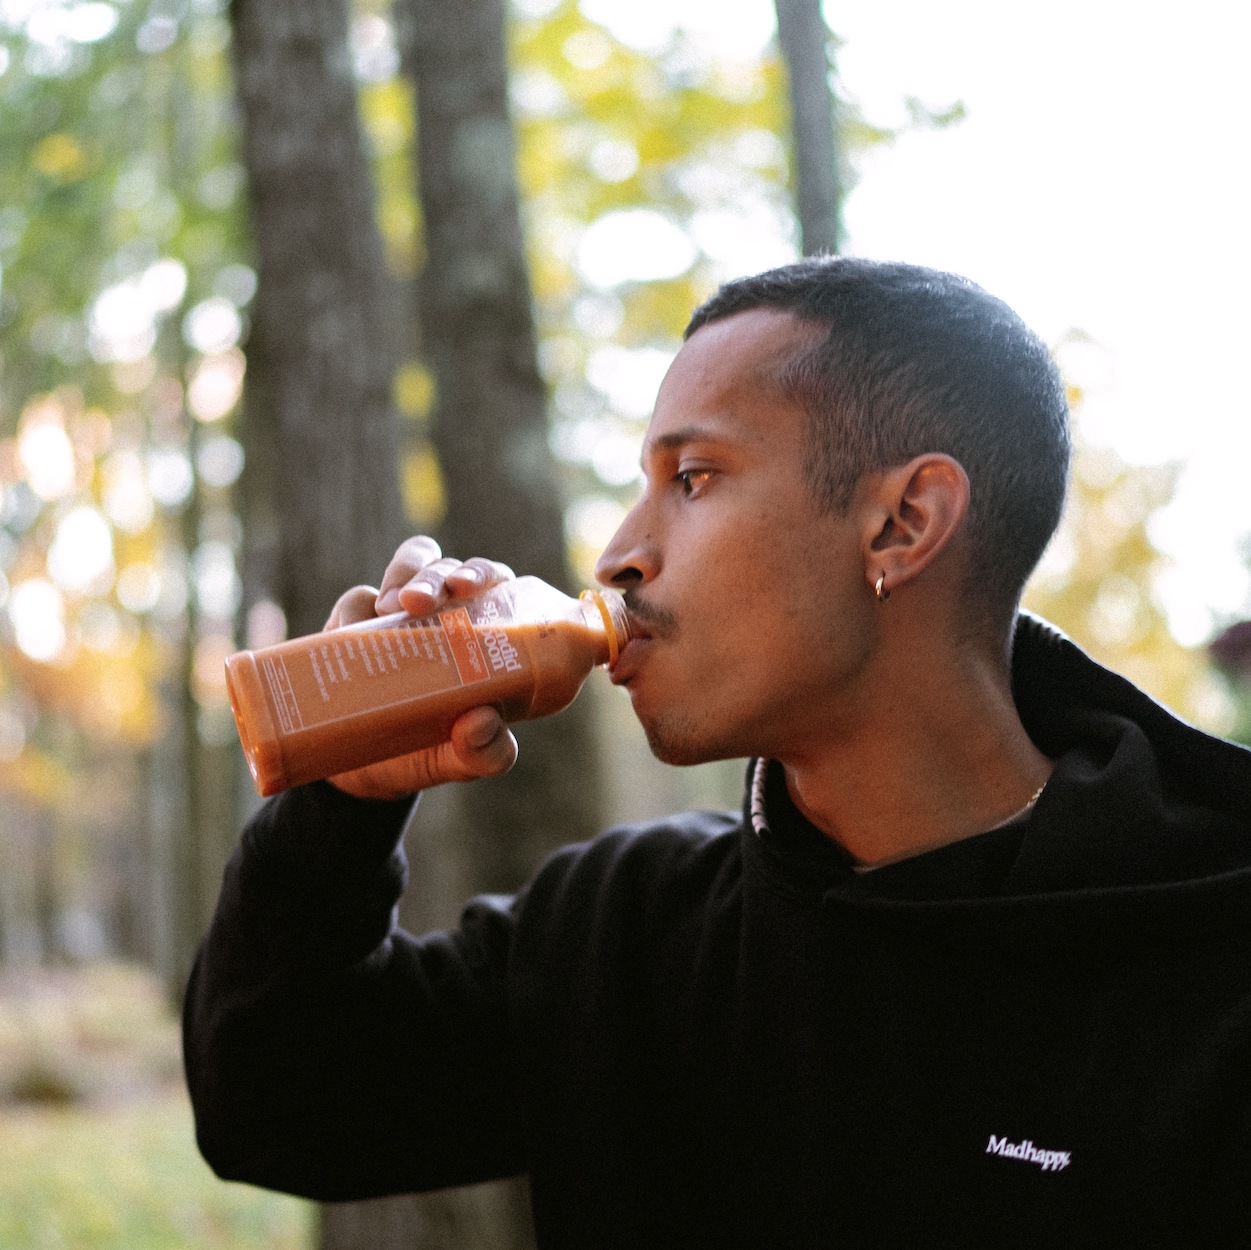 A man drinking a Splendid Spoon Carrot Ginger Chia smoothie. We see him in profile, wearing a black hoodie. Behind him are trees, with the sun is back-lighting the trees and the man's face.